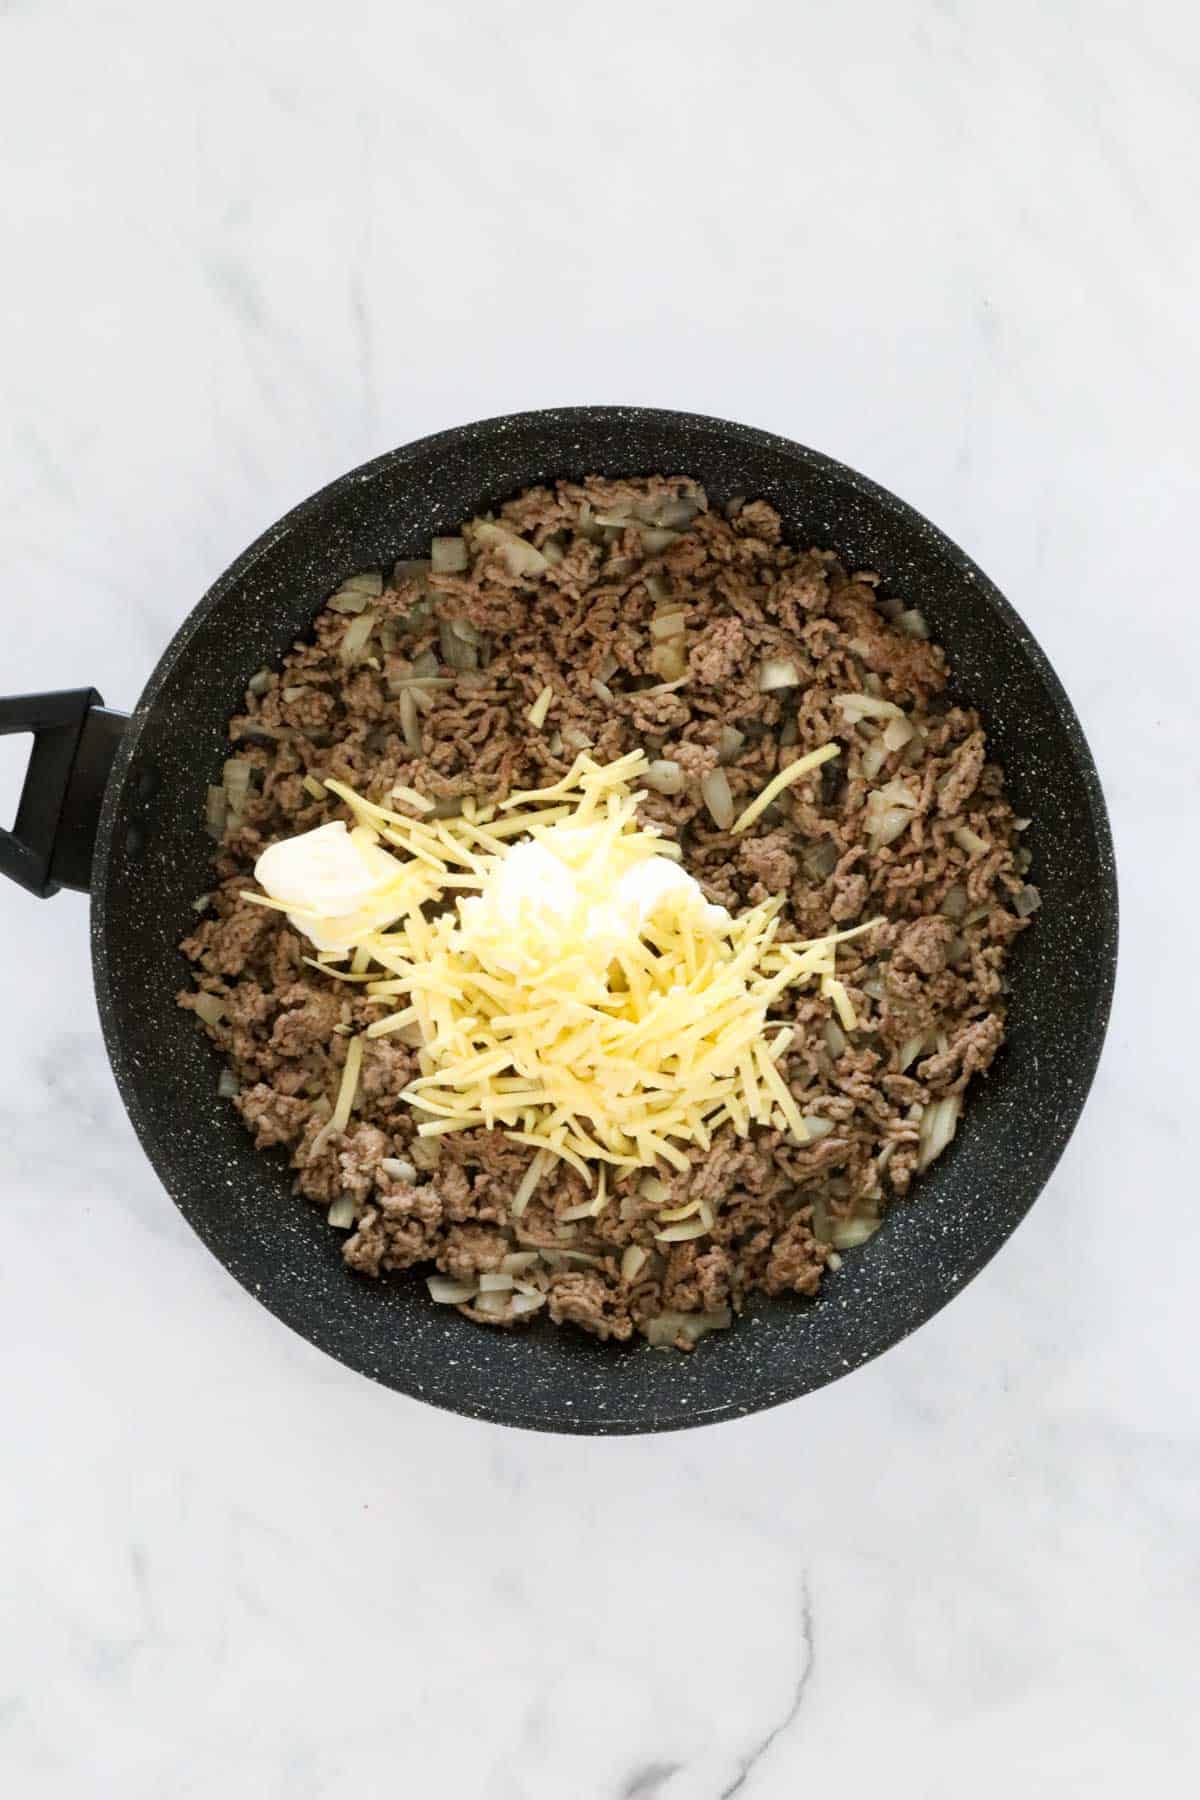 Cream cheese and grated cheese on top of beef mince in a pan.